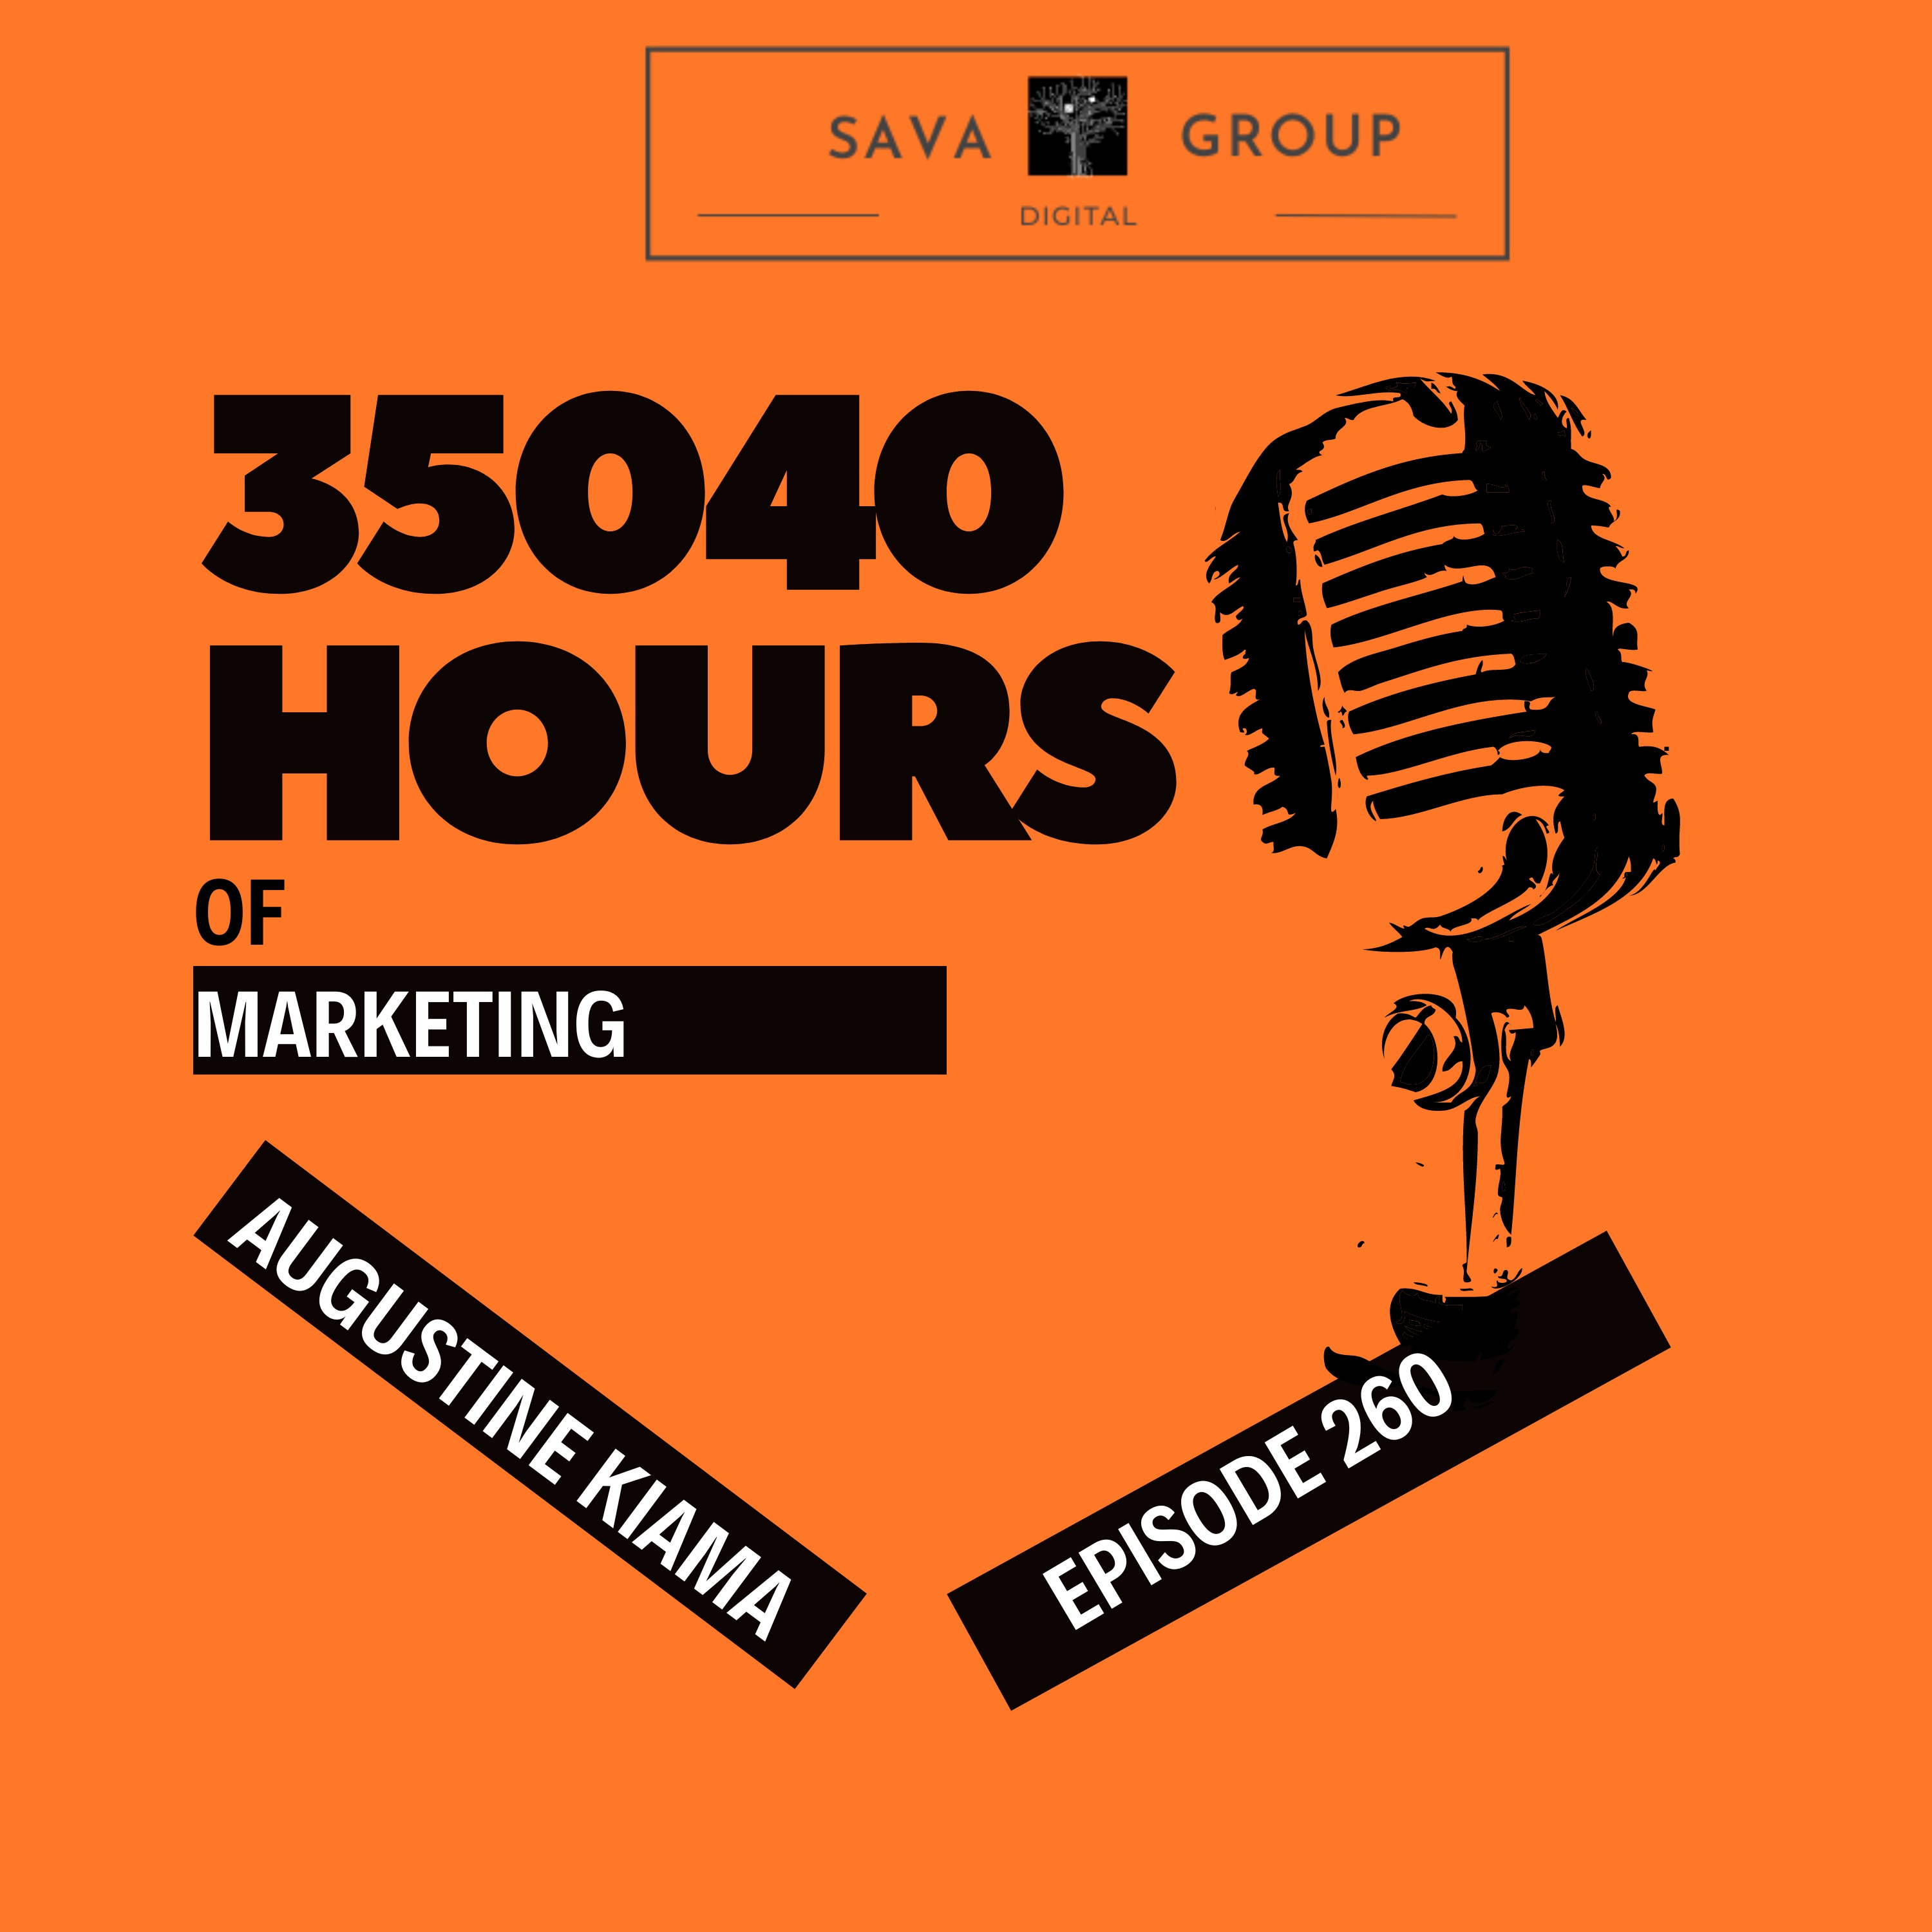 EP 260 : Lessons from 35040 hours of Marketing & Advertising